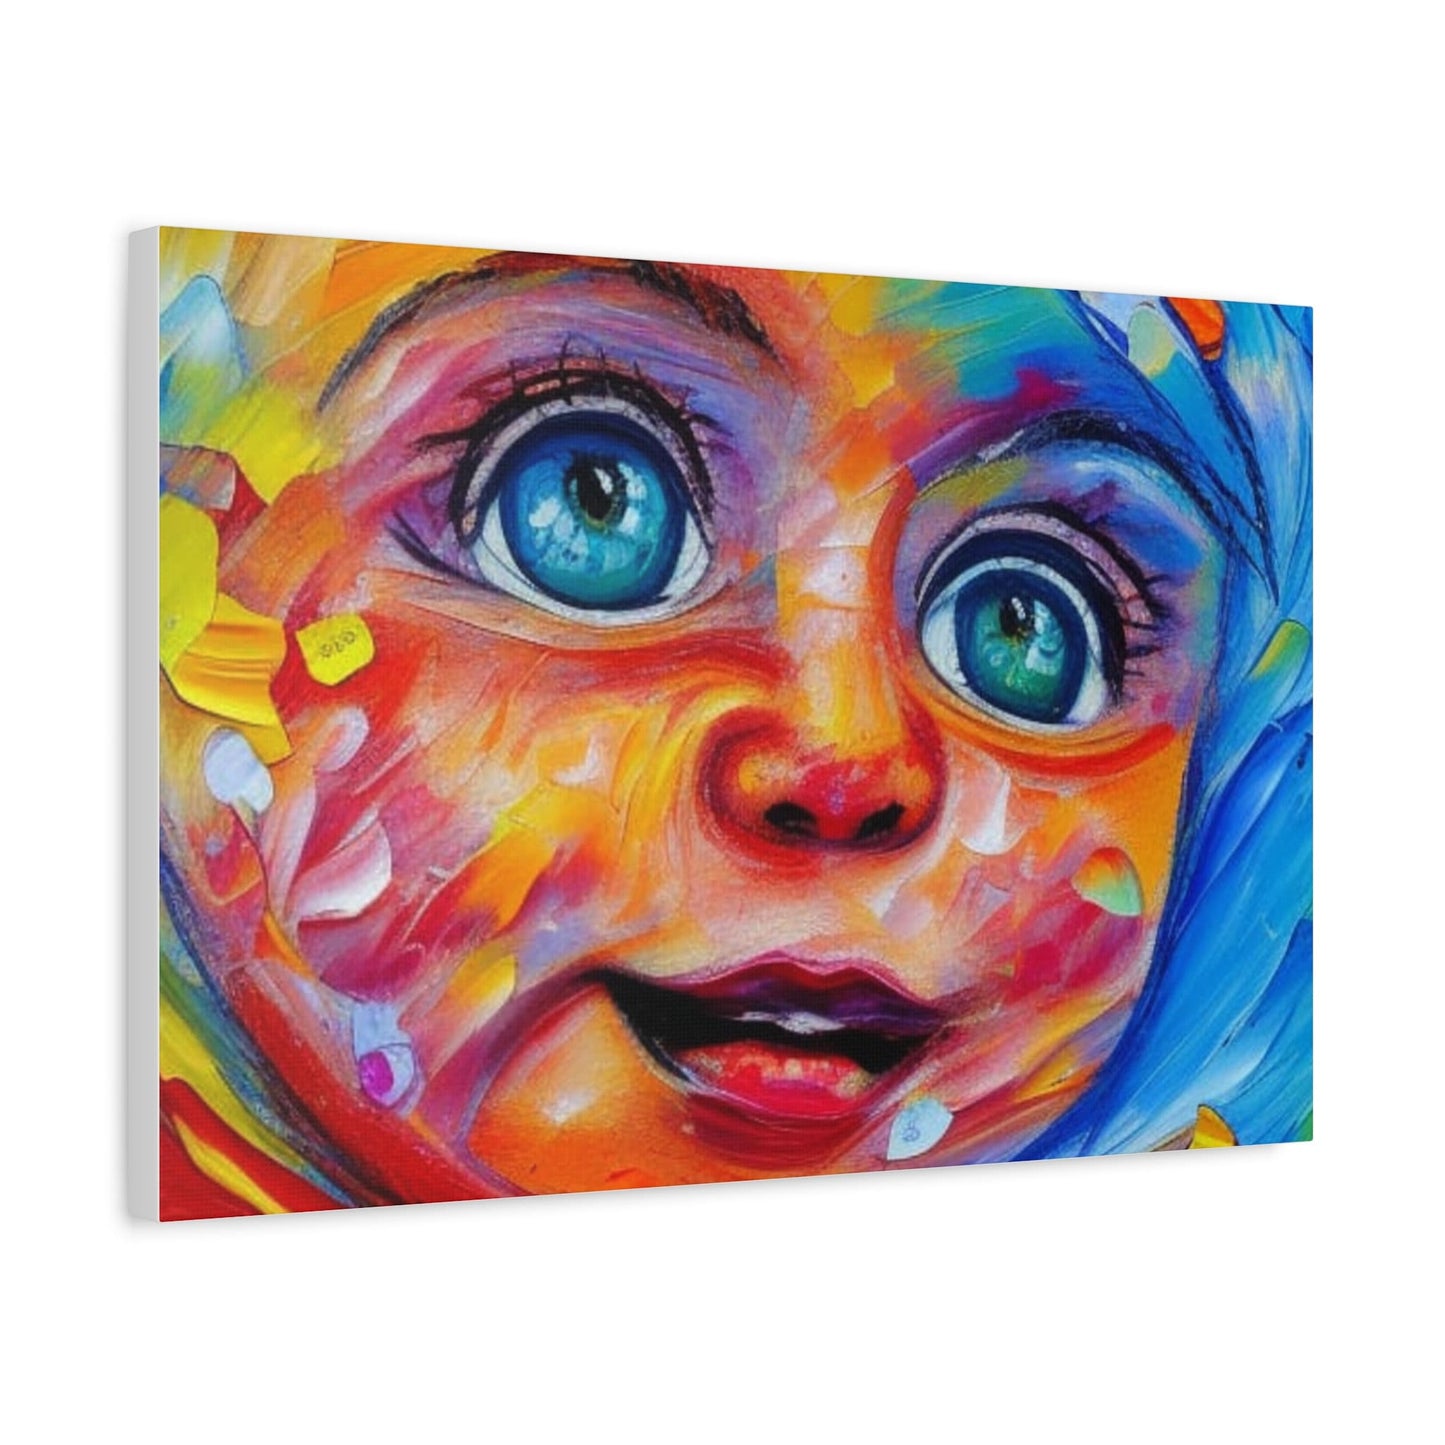 Cute Smiling Baby Canvas Art, Colorful Canvas Art, Cute Baby Poster, Gift, Framed Canvas Artwork, Colorful Poster